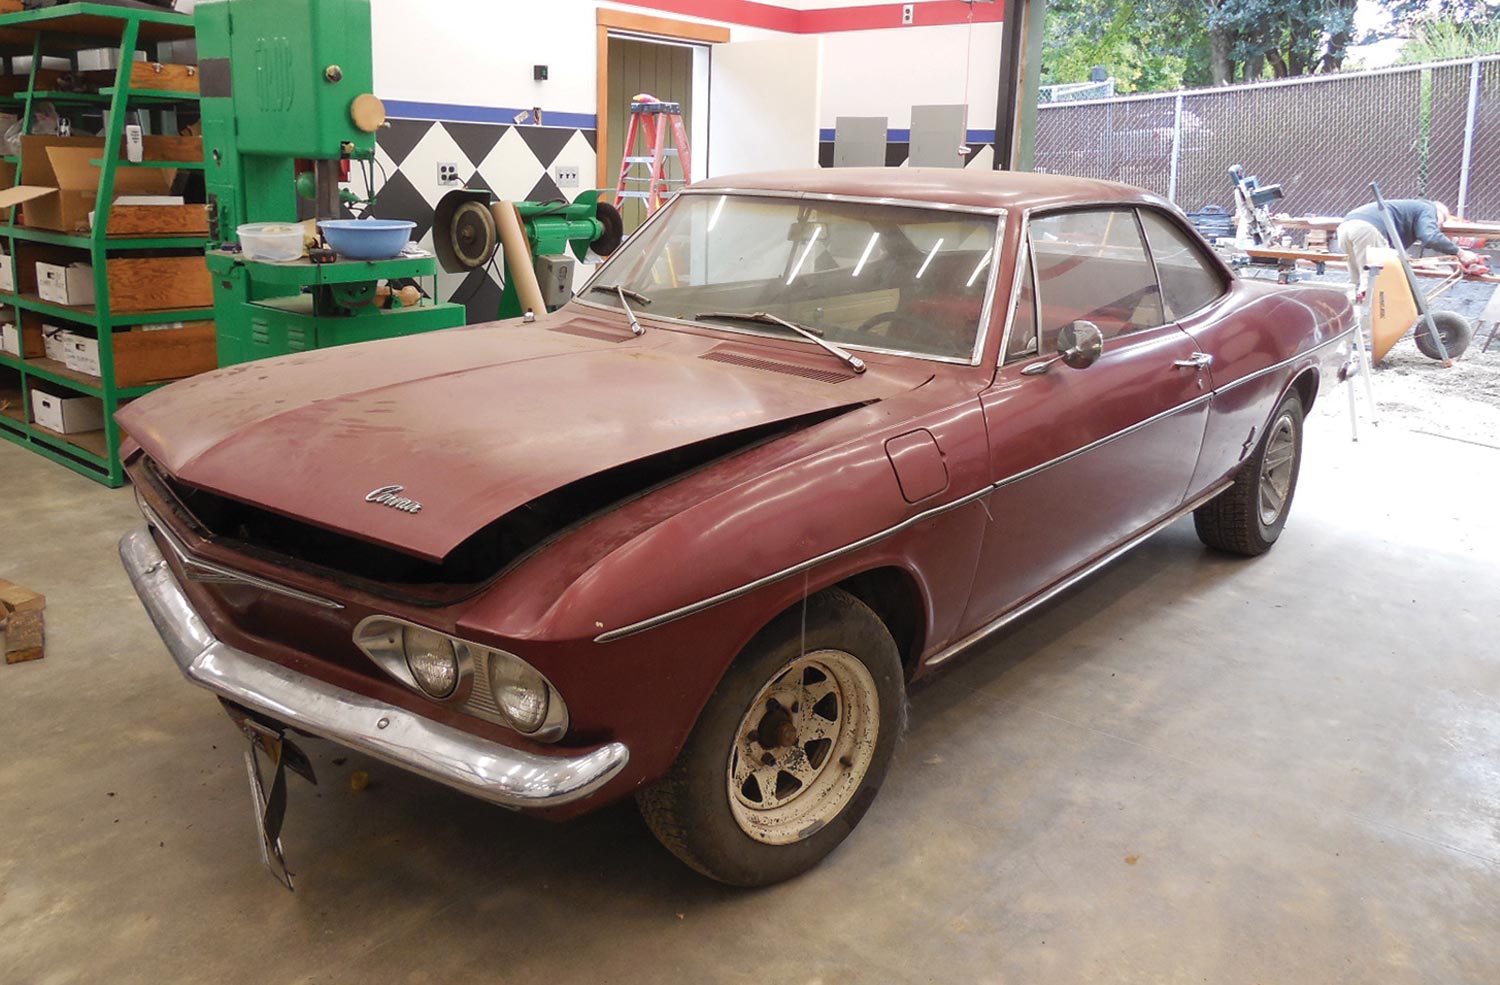 a shabby 1965 Corvair Corsa sits in a garage